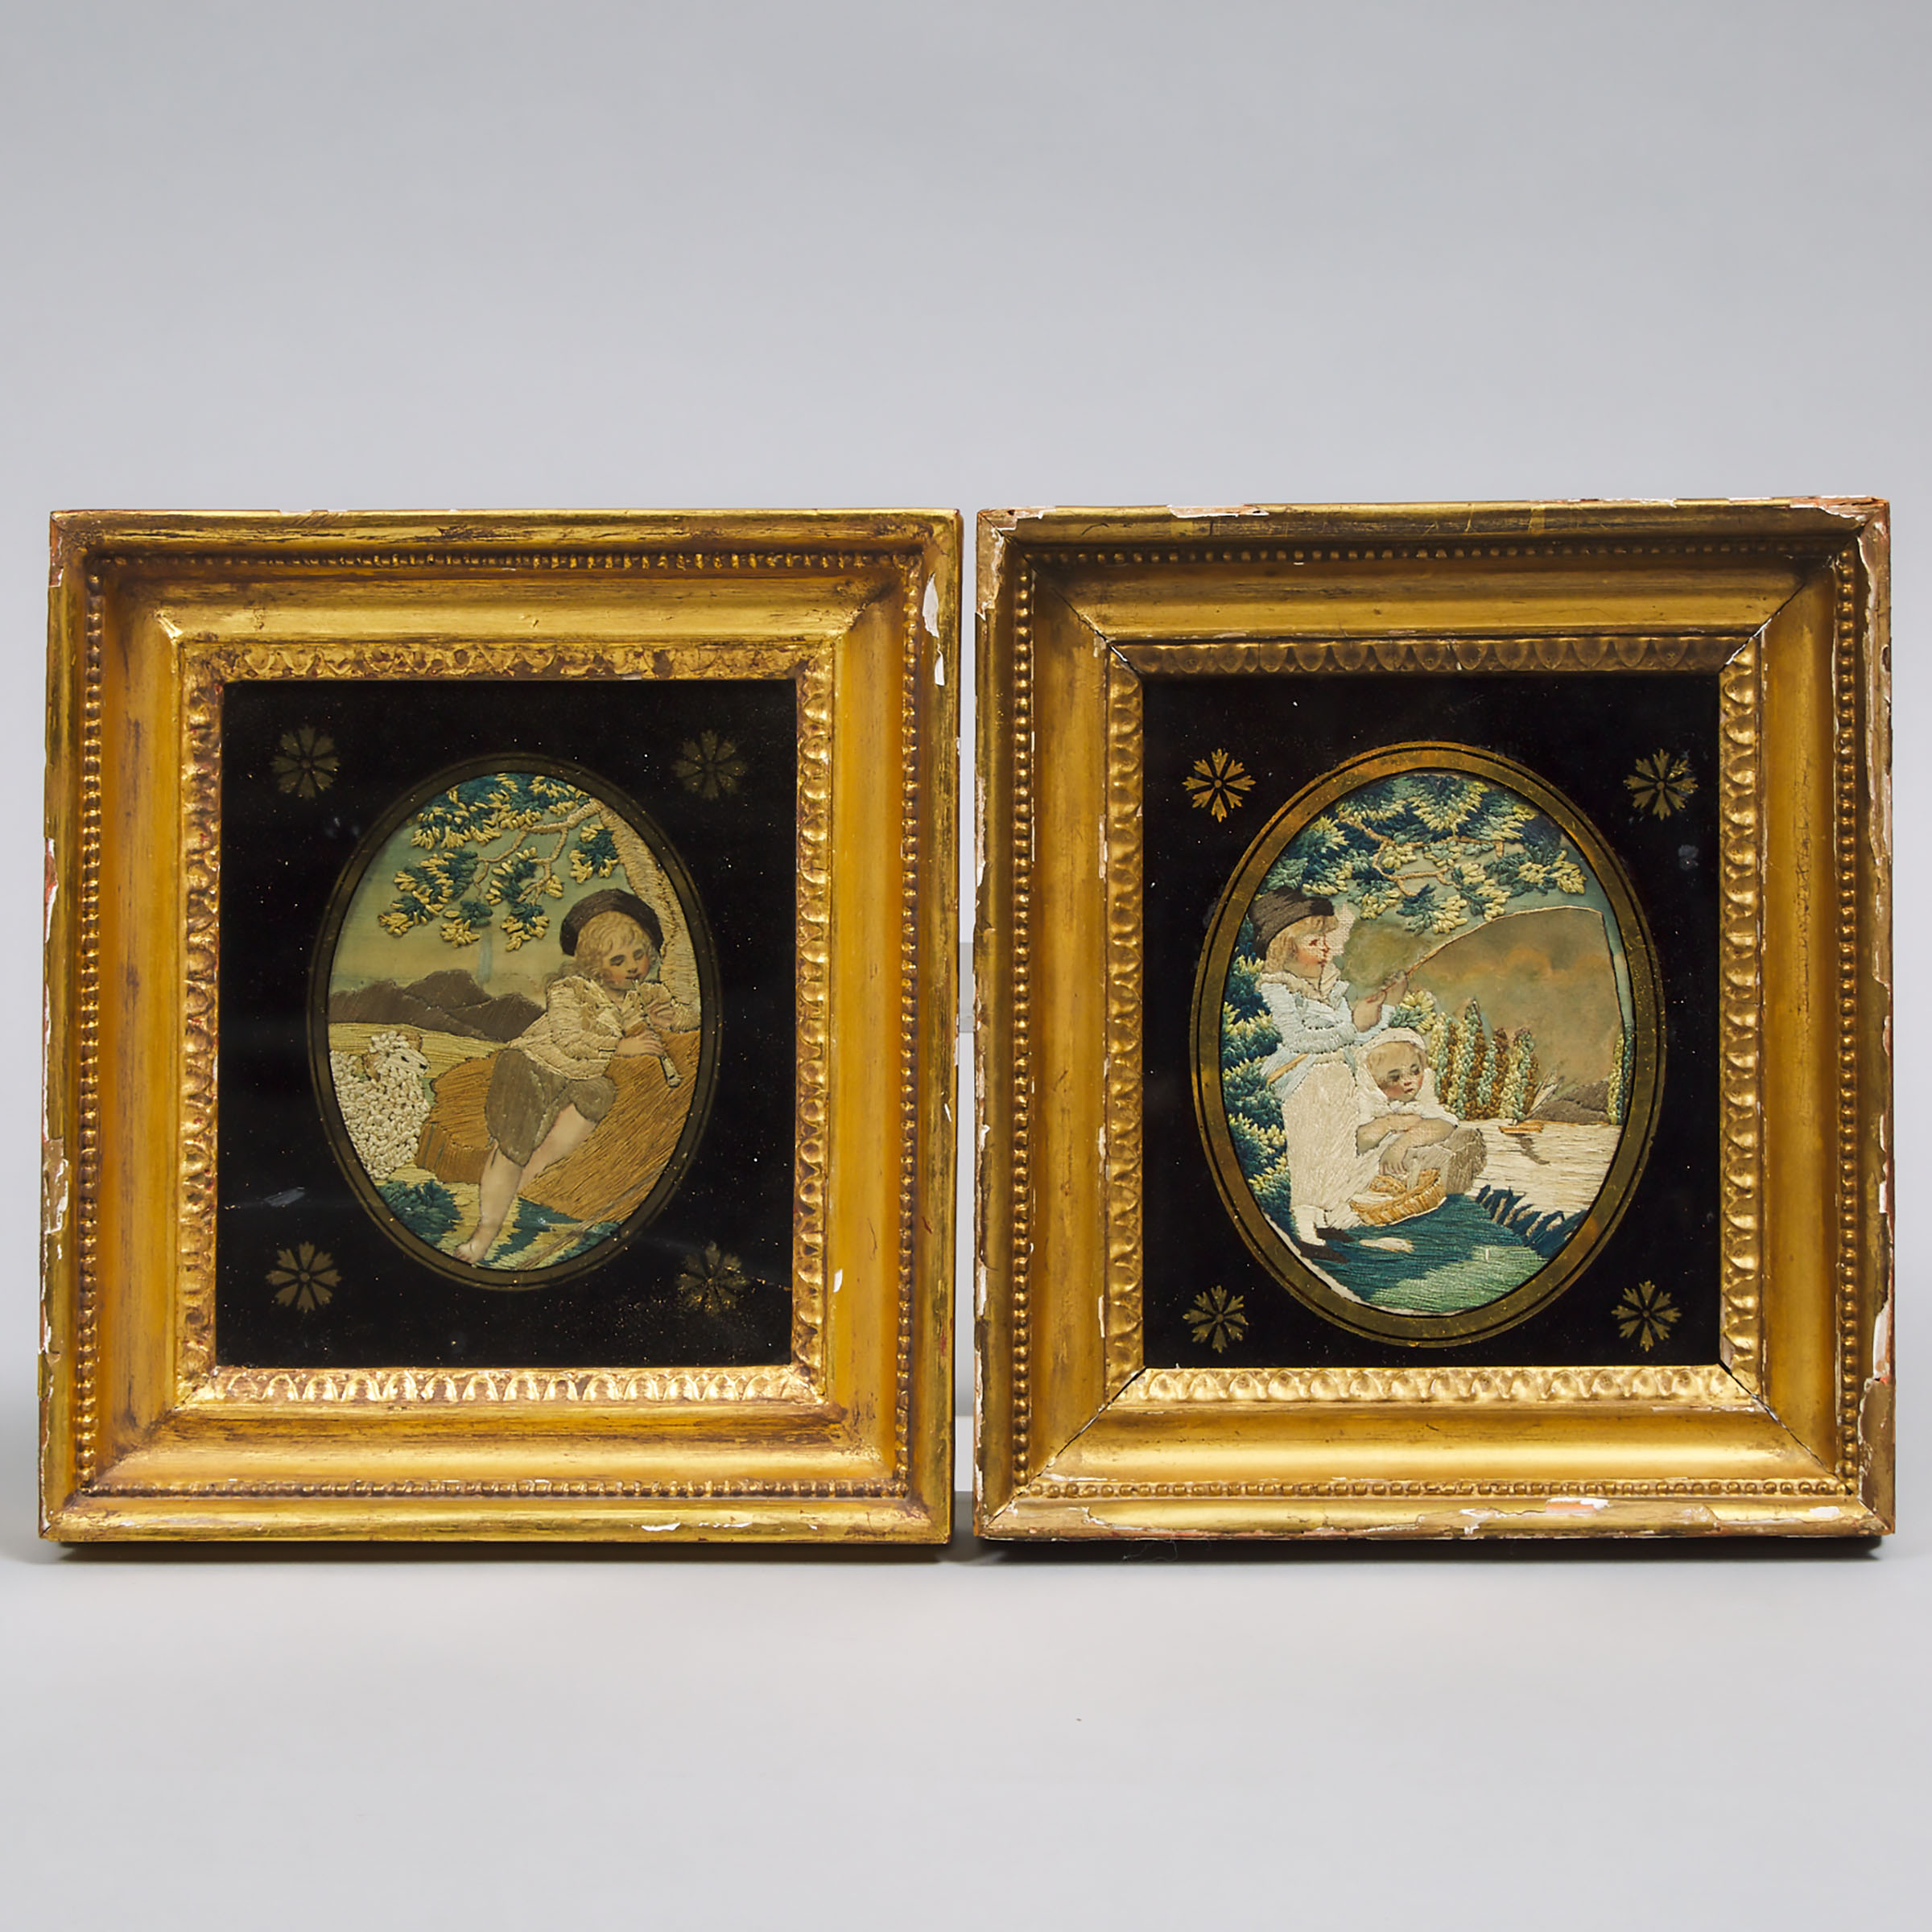 Pair of Small Georgian Needlework Pictures, late 18th/early 19th century